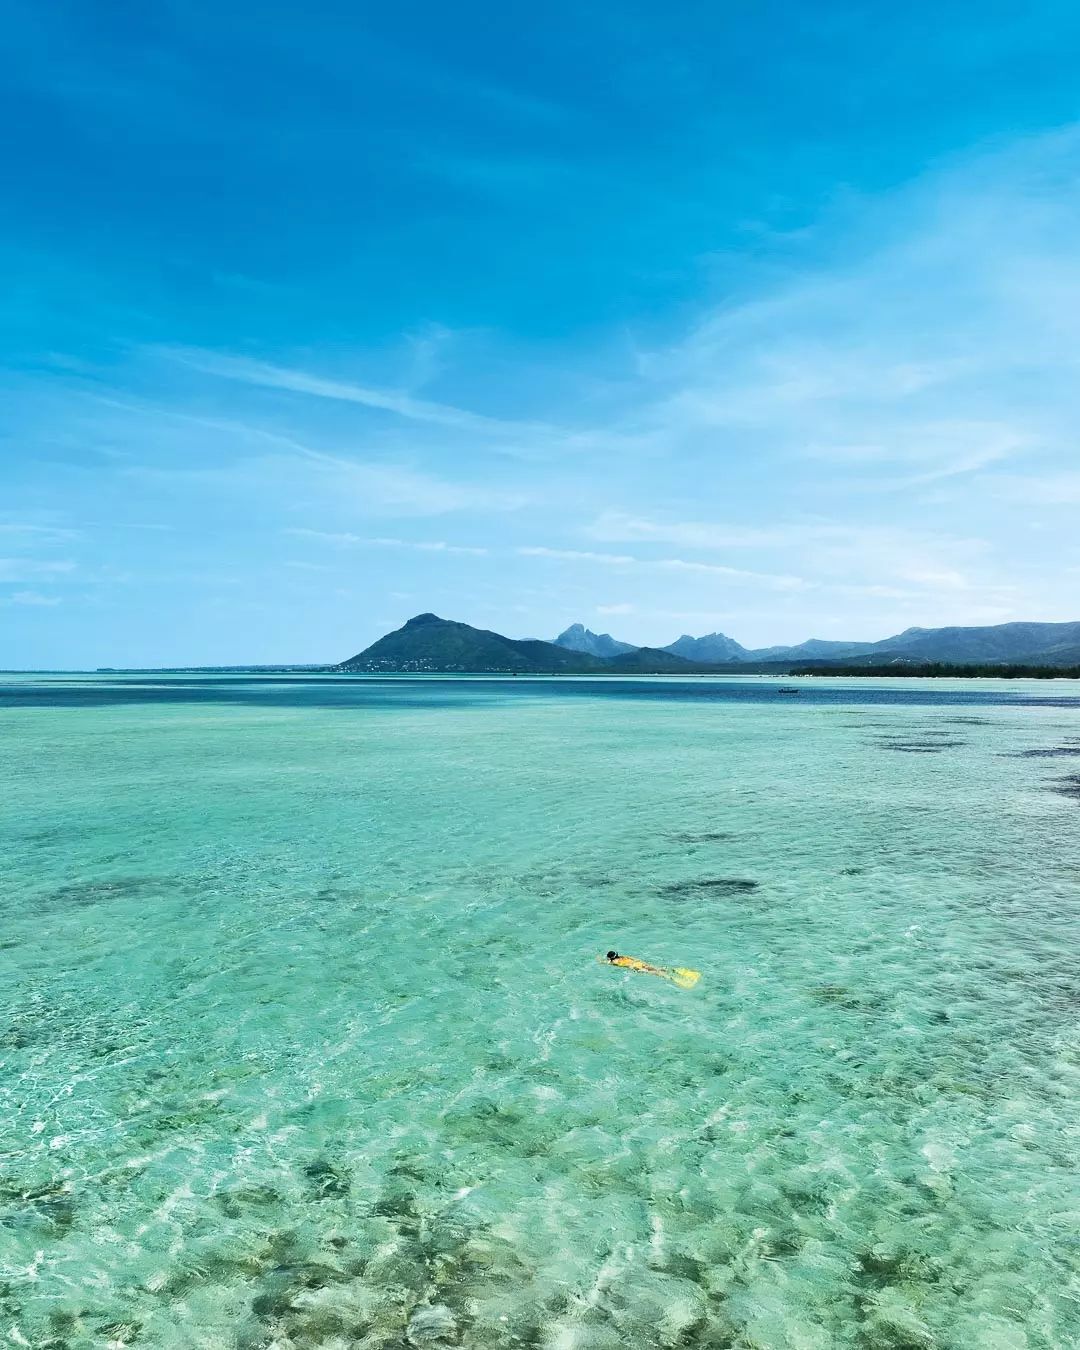 A small African island in the Indian Ocean, Mauritius draws in visitors searching for sun, sand, and relaxation. But there’s more to this idyllic destination than its stunning beaches and turquoise waters, including newly opened cultural spots like the Intercontinental Slavery Museum and the <a href="https://houseofdigitalart.io/" rel="noreferrer noopener">House of Digital Art (HODA)</a>. Adventure seekers should consider hiking the Black River Gorges National Park or the majestic Le Morne Brabant. <a href="https://www.holidify.com/pages/snorkelling-in-mauritius-1147.html" rel="noreferrer noopener">Snorkelling</a> is also top-notch here, with dozens of incredible locations to swim amongst the majestic sea life.